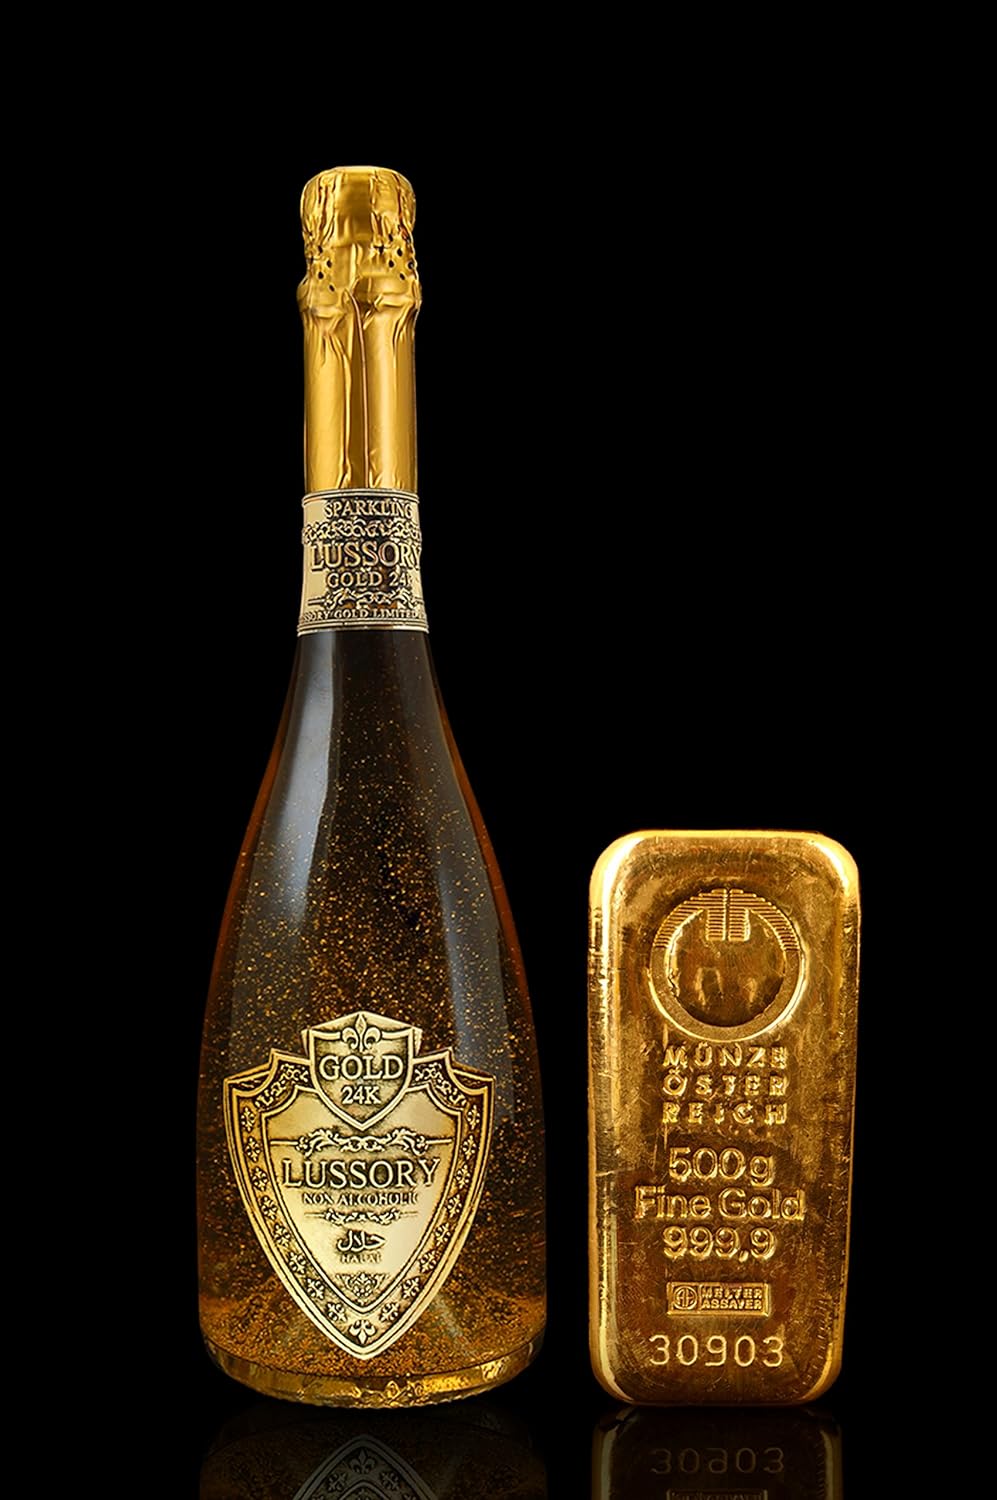 Lussory Gold 24k product image with gold bar